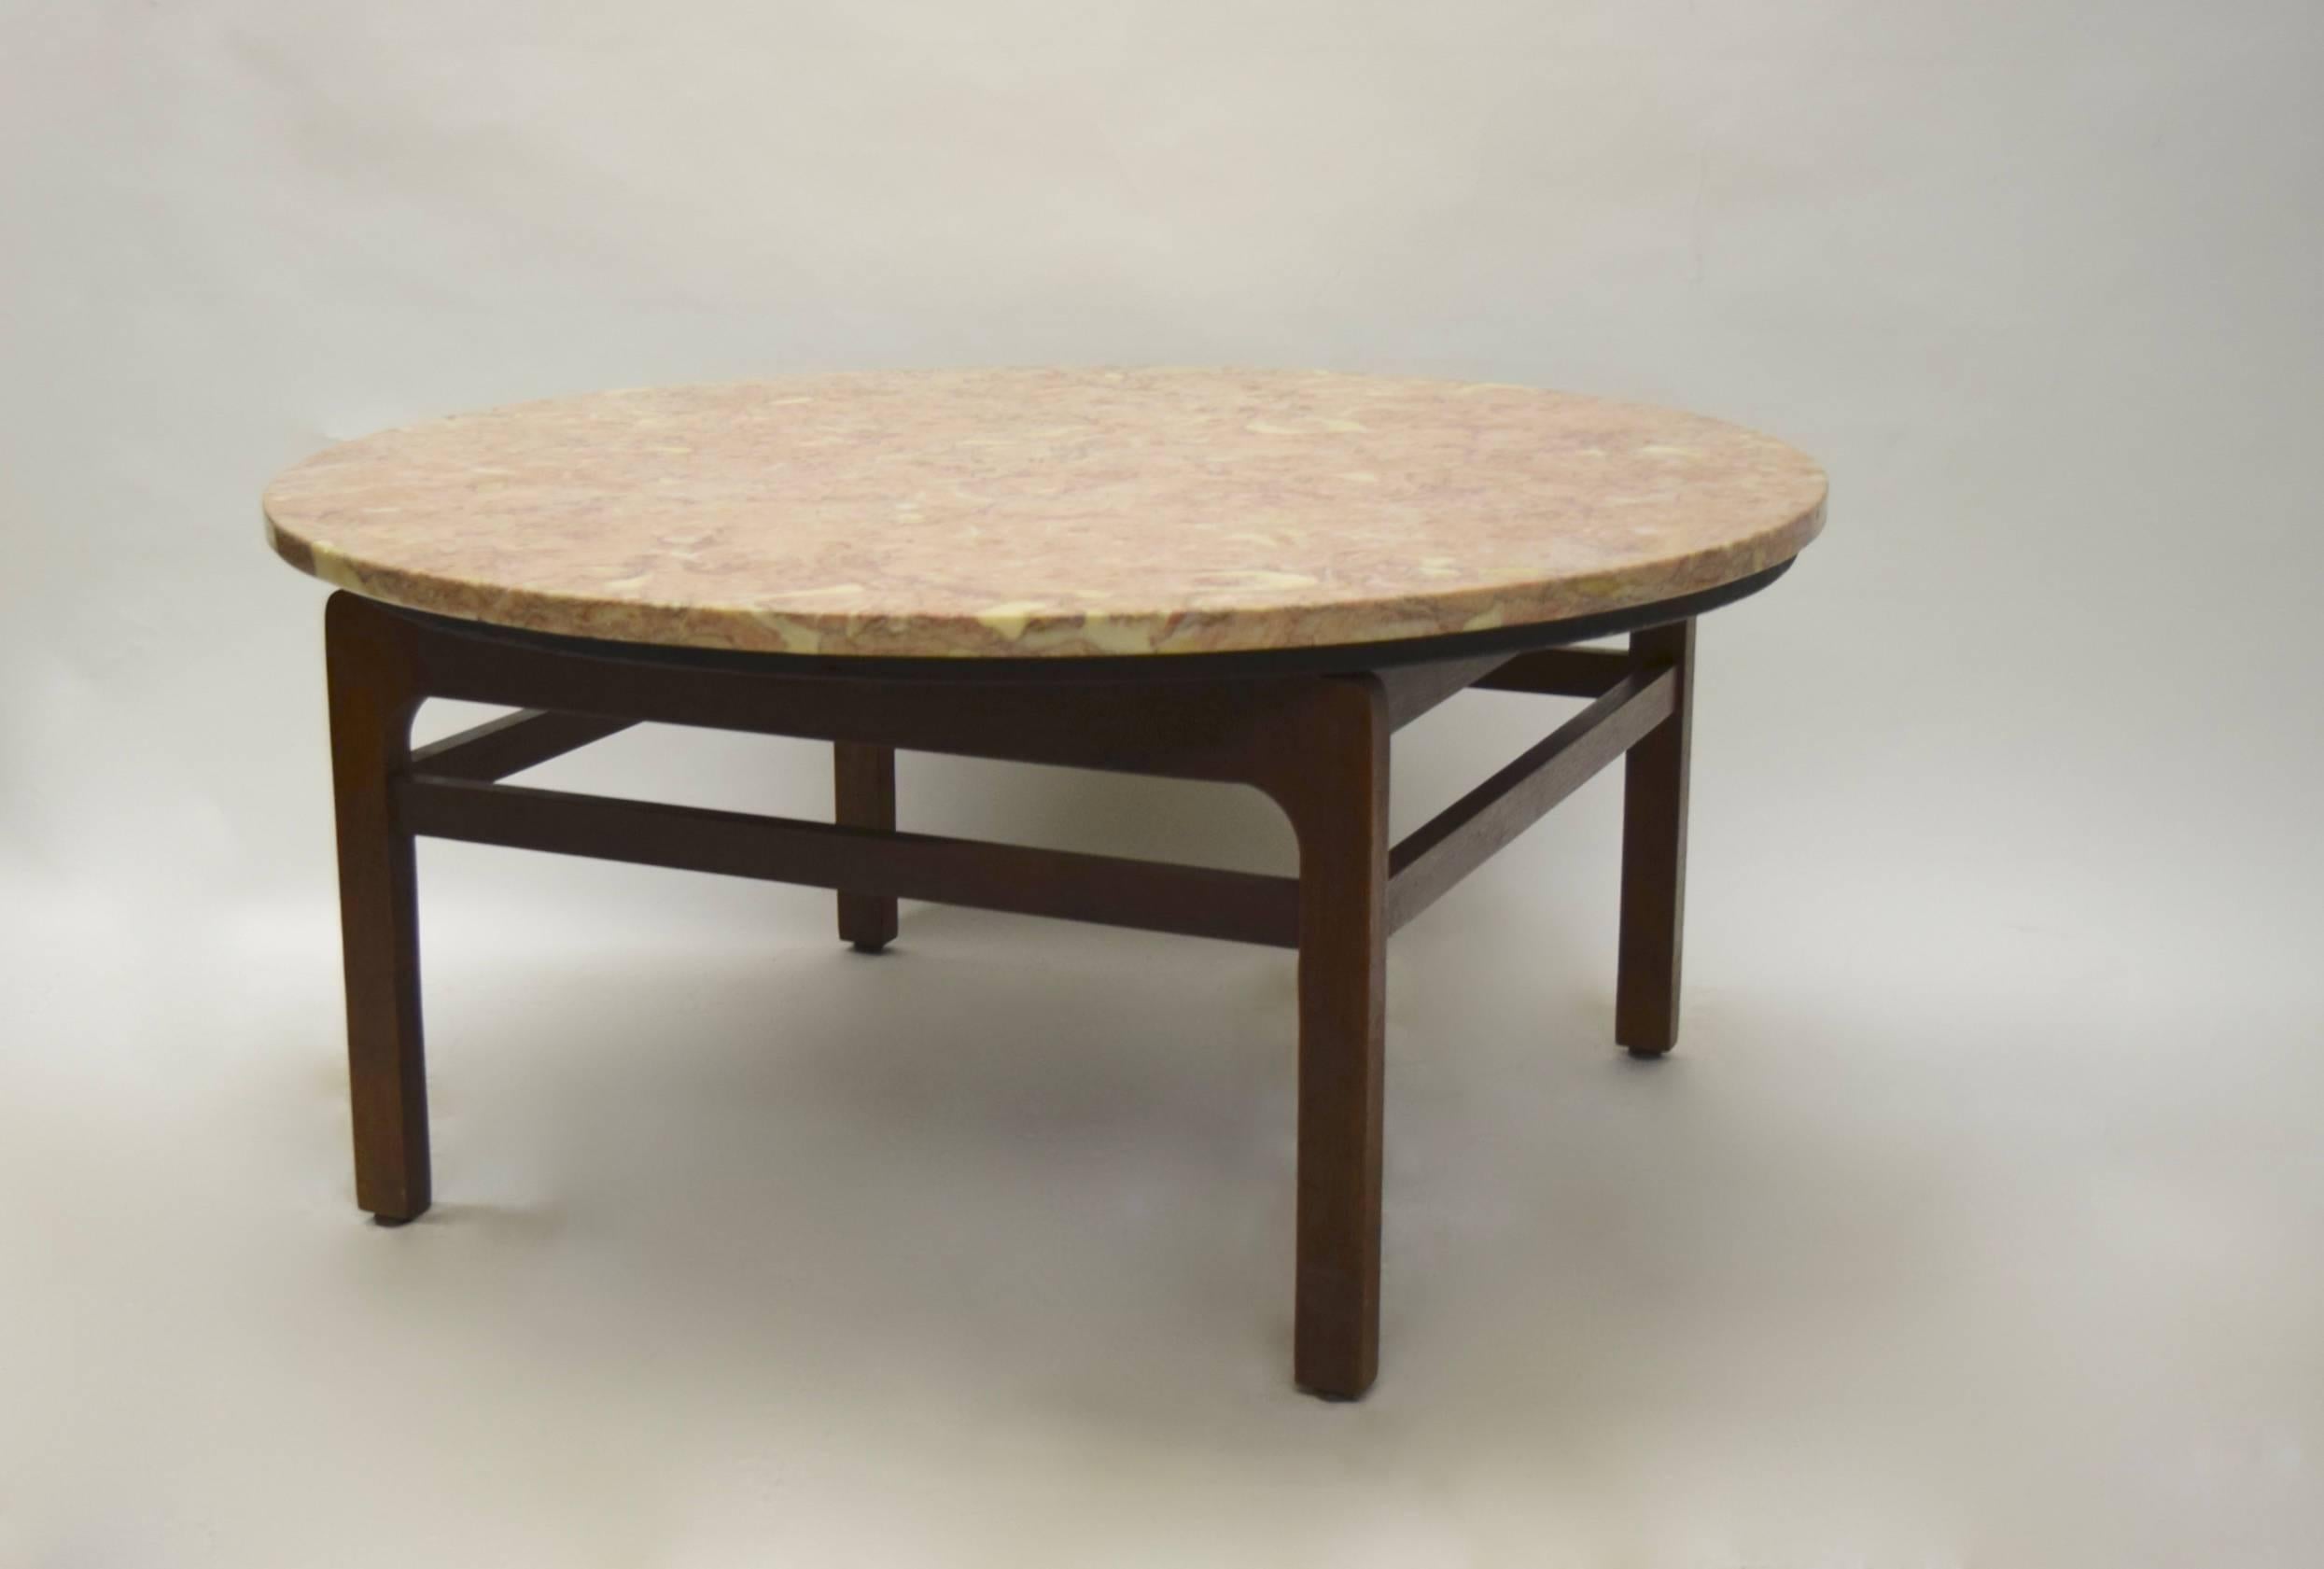 Coffee table by Jens Risoms has original labels underneath. The top is a 36 inch round 3/4 inch thick sealed piece of pink marble with flakes of lighter shades throughout sits on top of a walnut base thats 24 inches square with stretchers on all